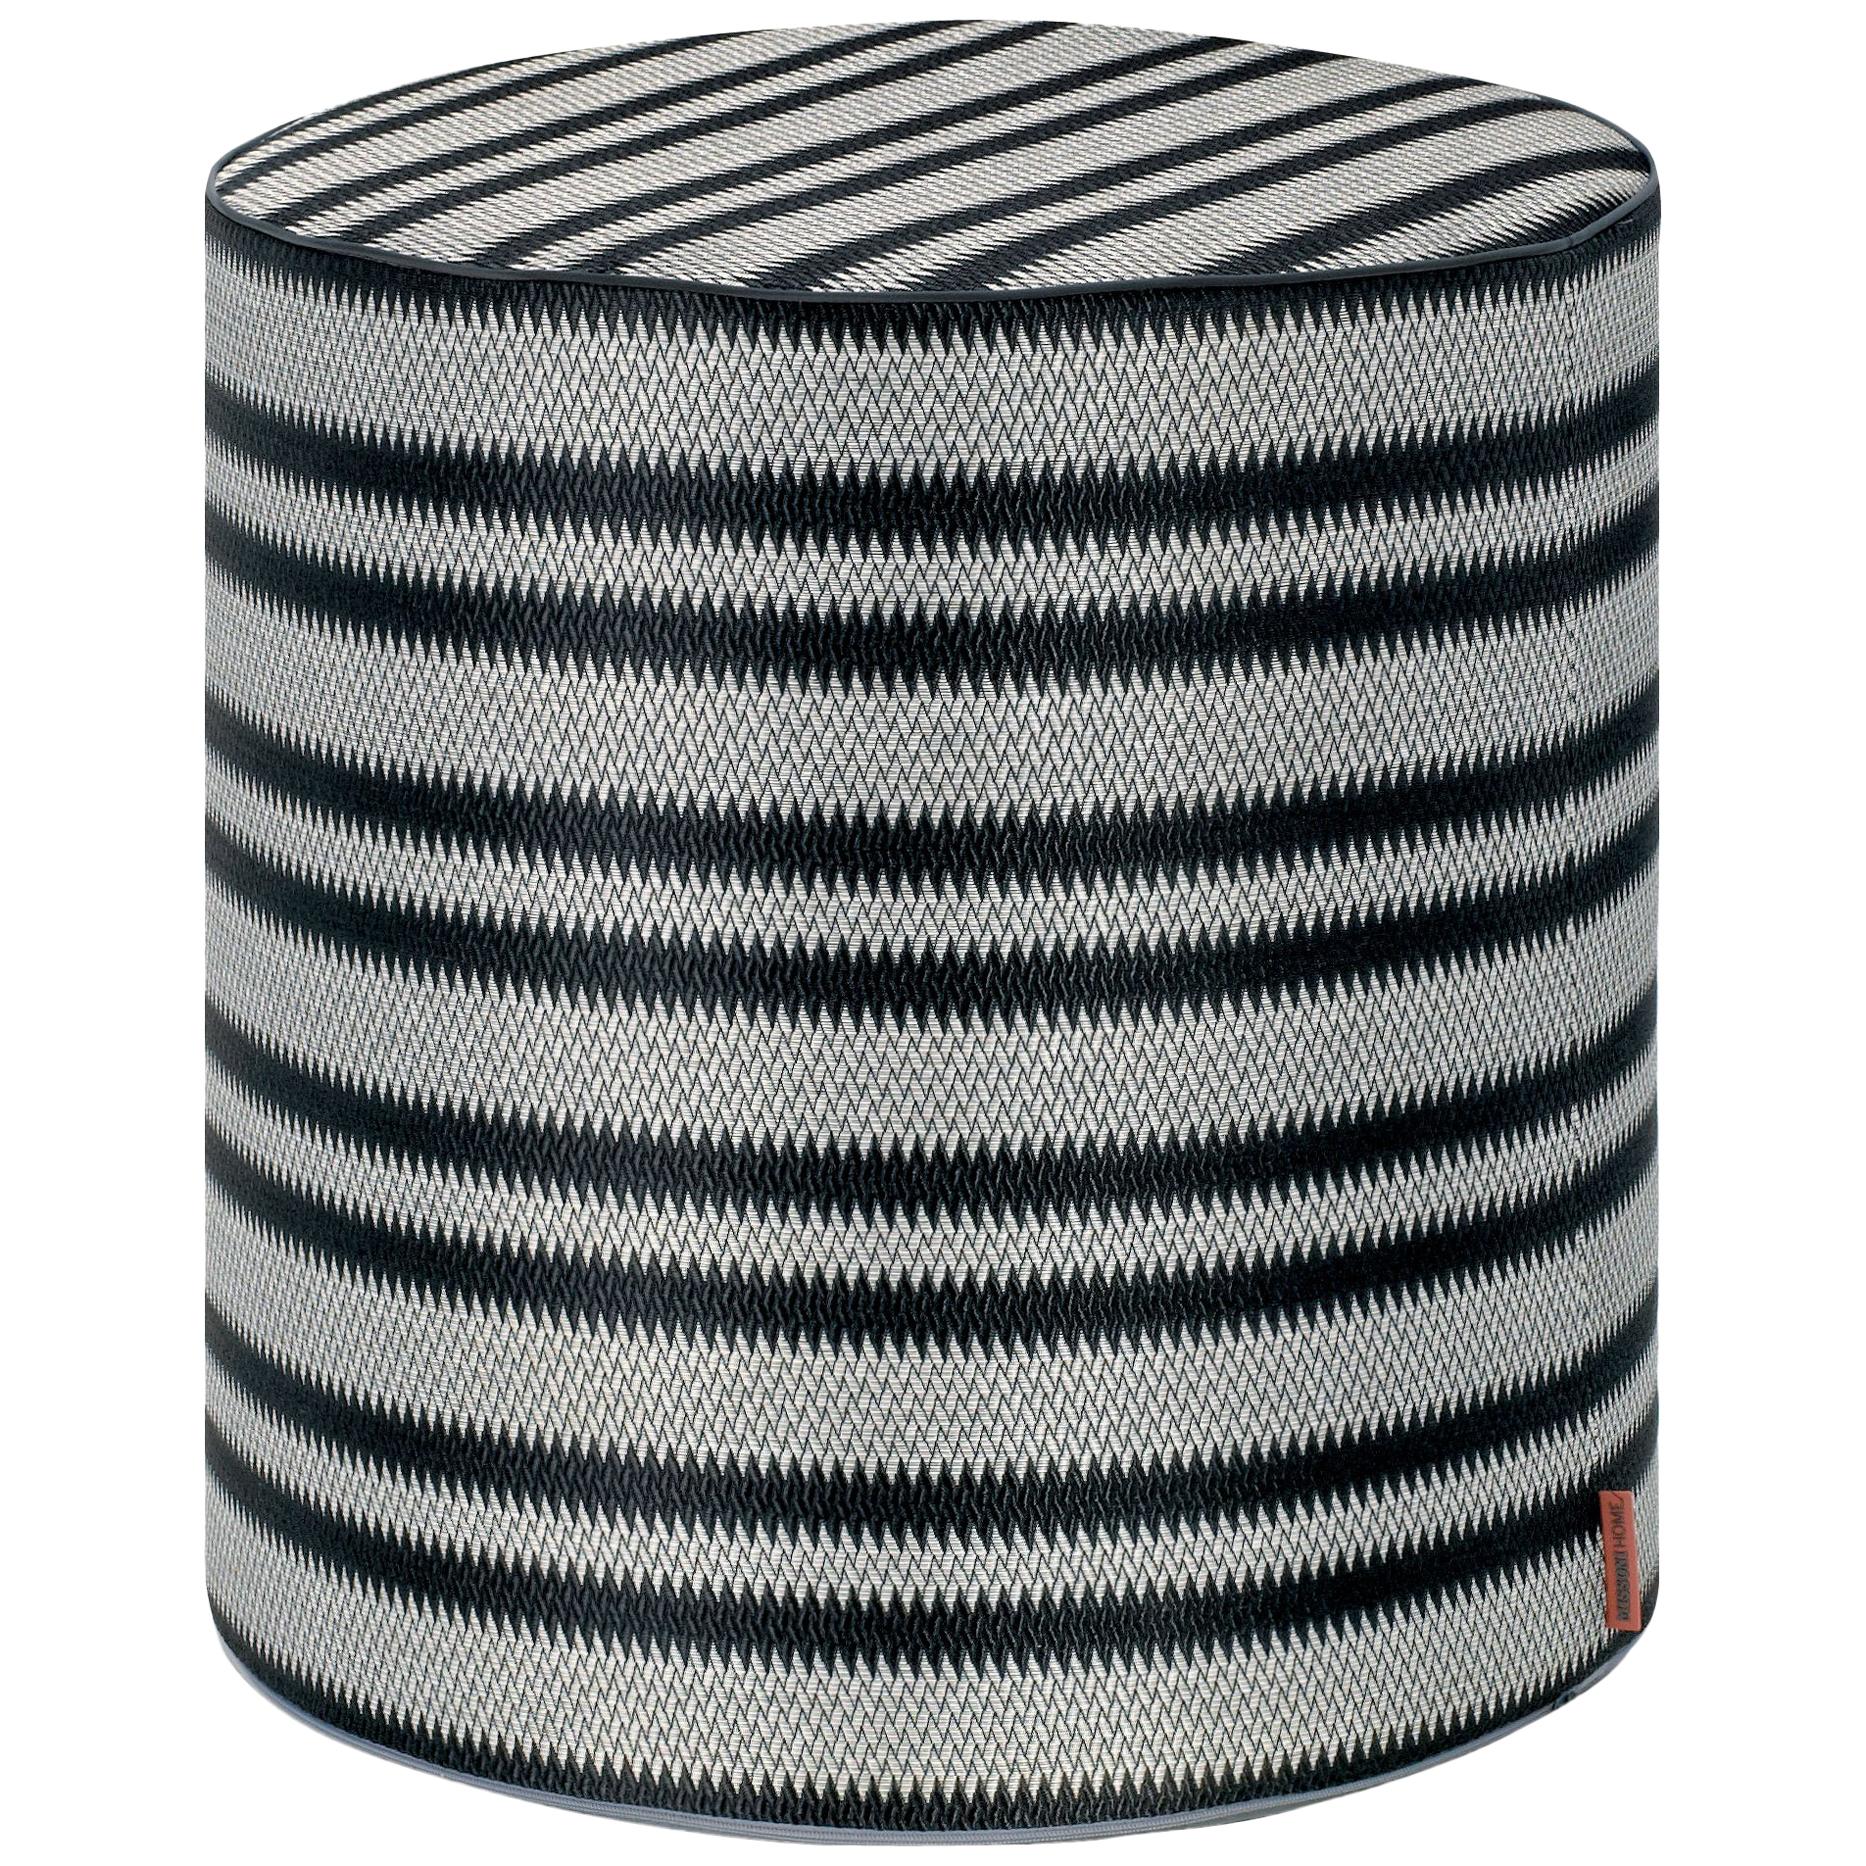 Missoni Home Prescott Tall Cylinder Pouf in Black and White Stripe Print For Sale